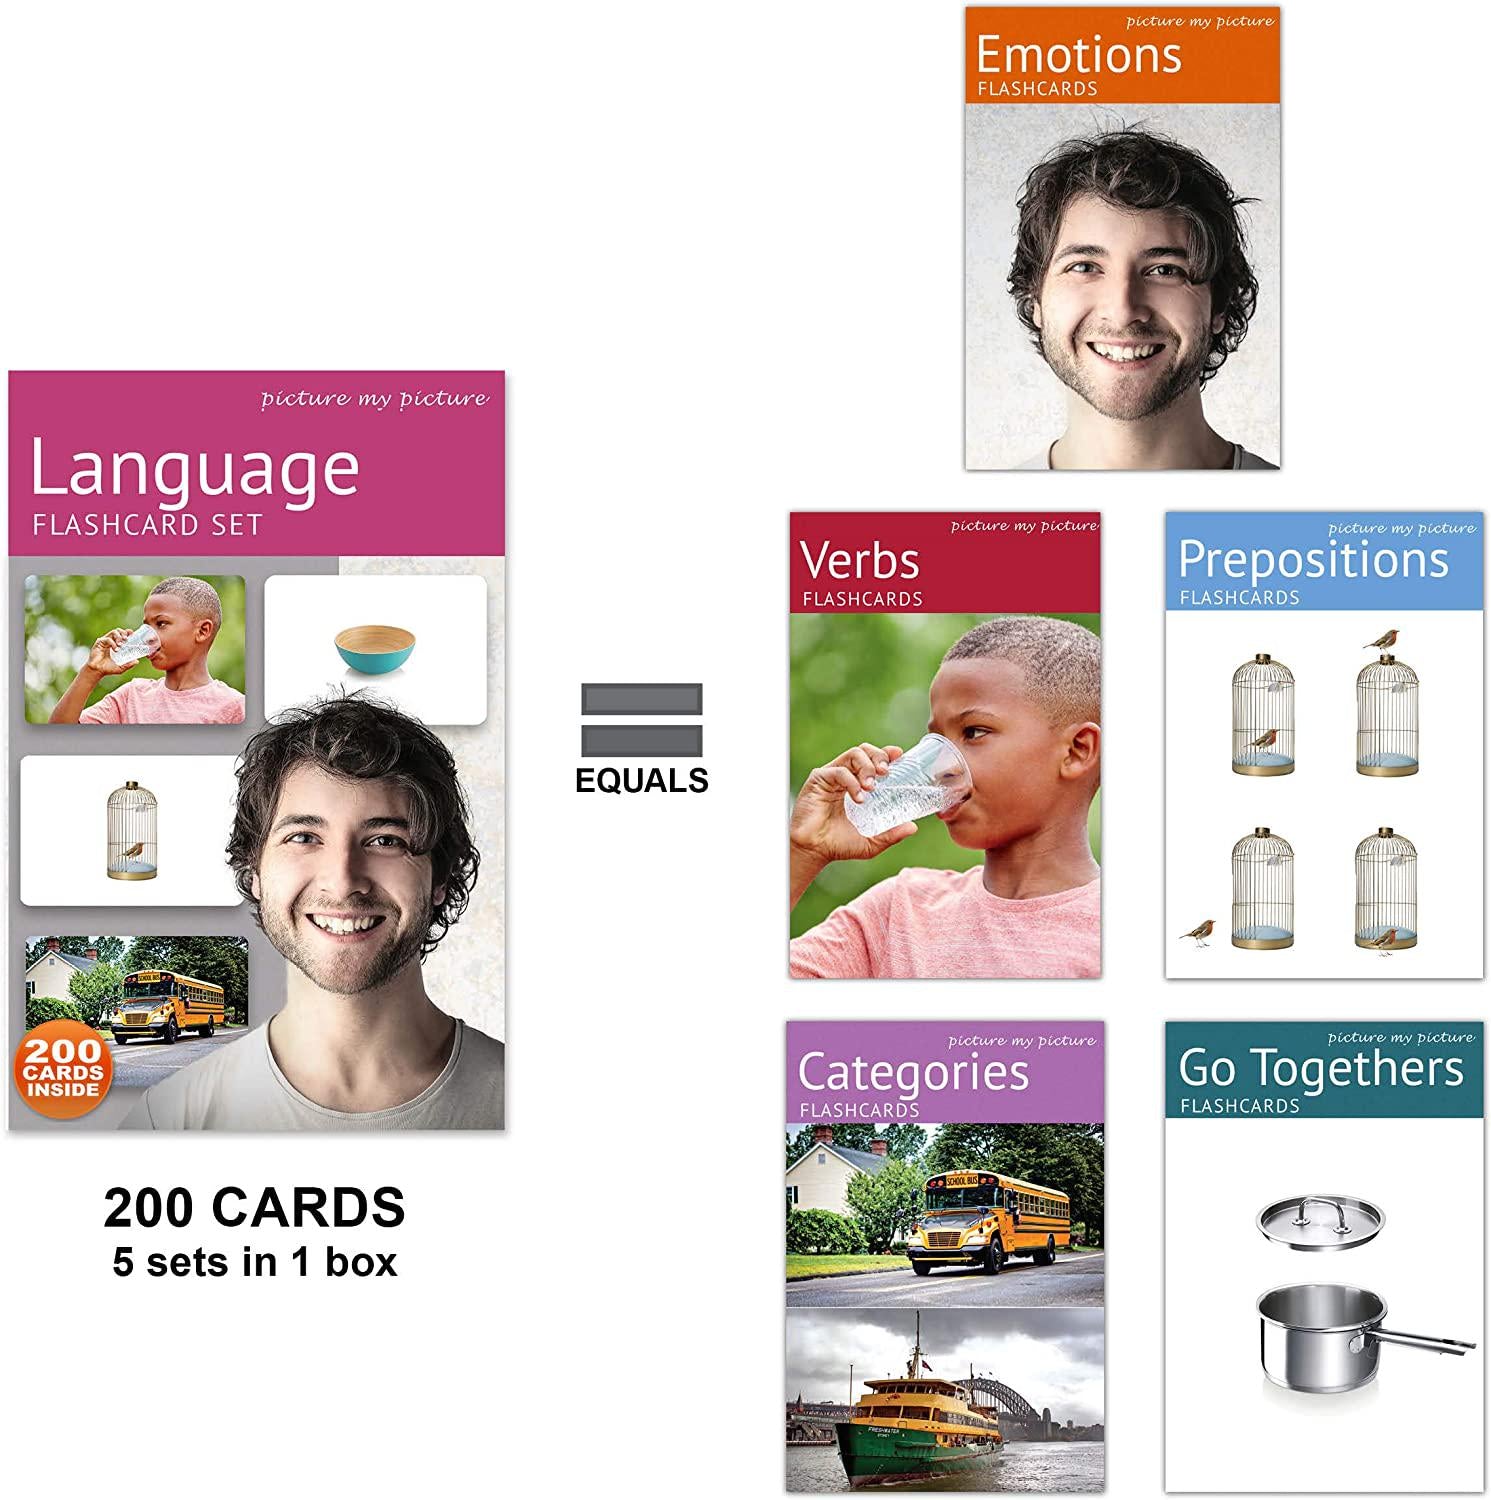 Picture My Picture, Language Flash Card Set | 200 Language Photo Cards | Speech Therapy Materials and ESL Materials